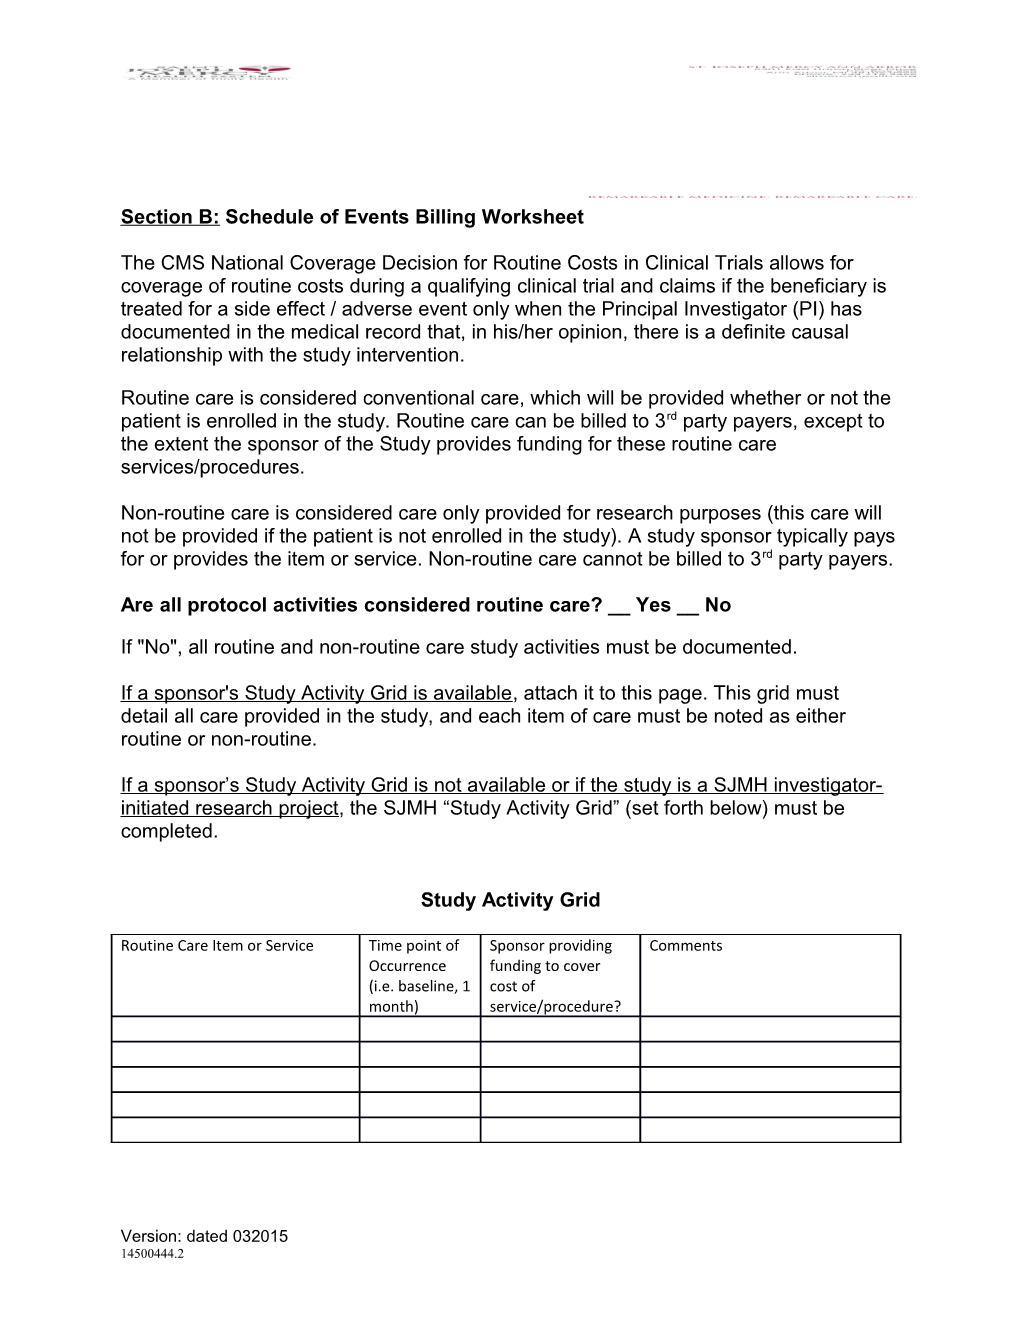 Medicare Cost Analysis Documentation of Research Billing Review Form